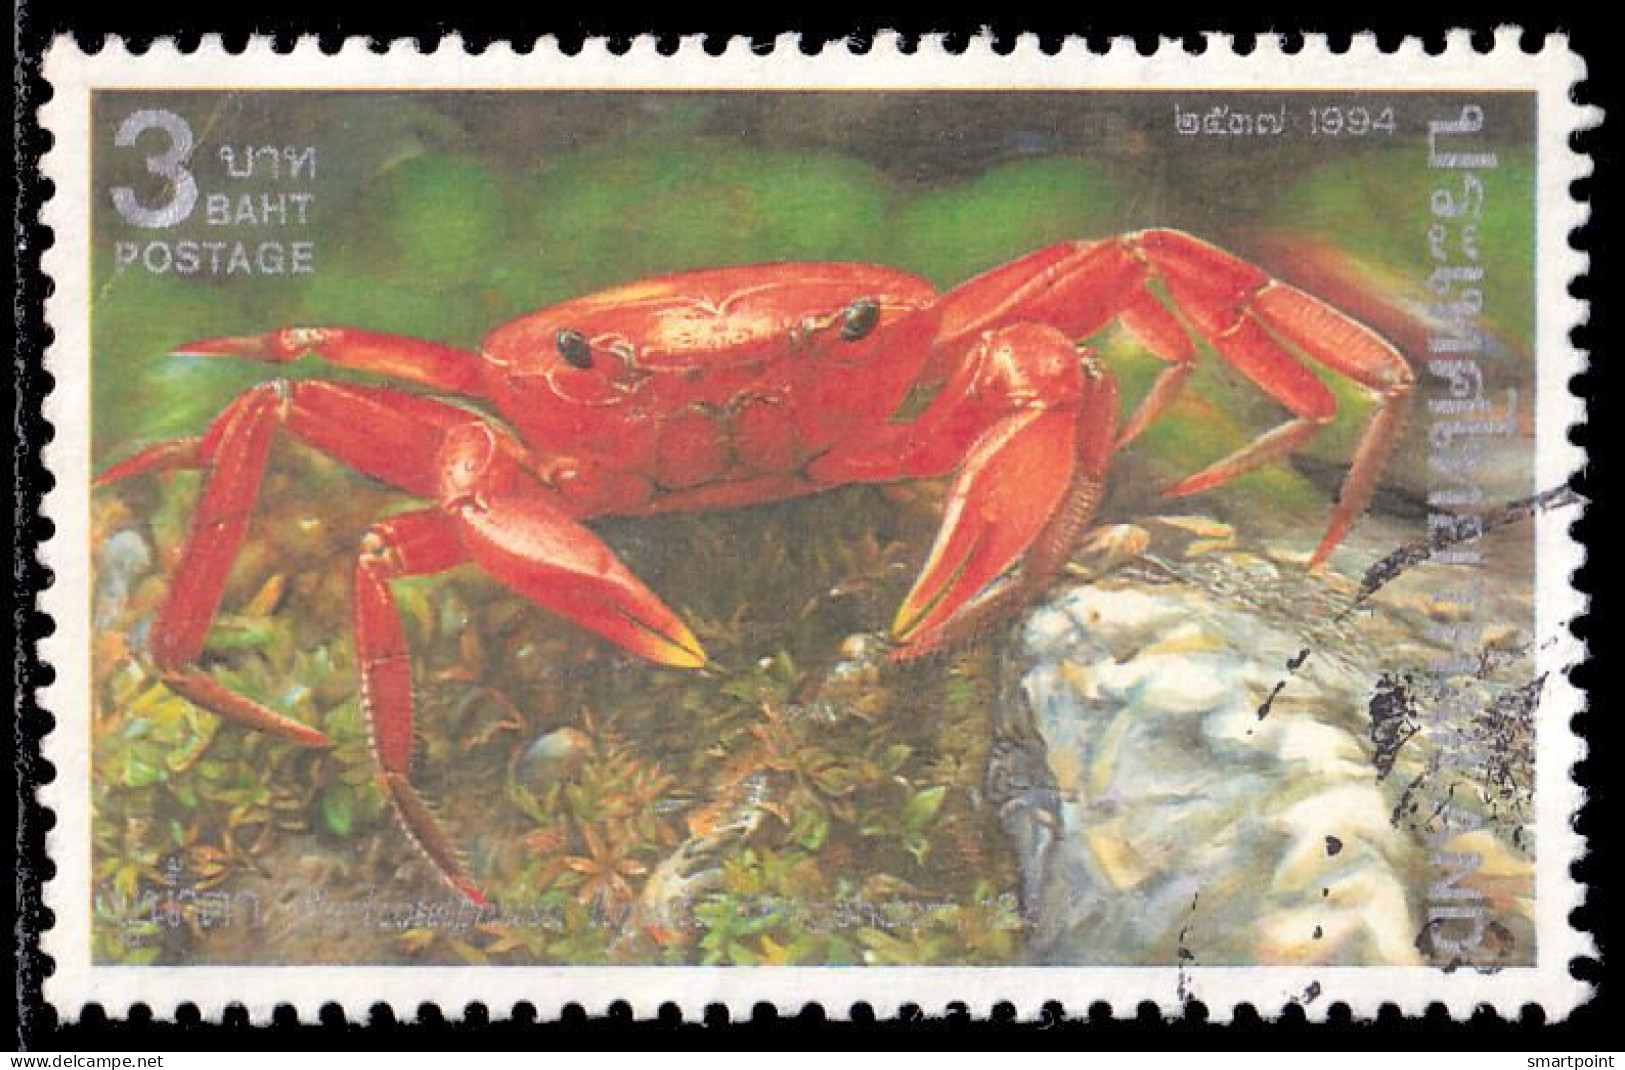 Thailand Stamp 1994 Crabs (2nd Series) 3 Baht - Used - Tailandia